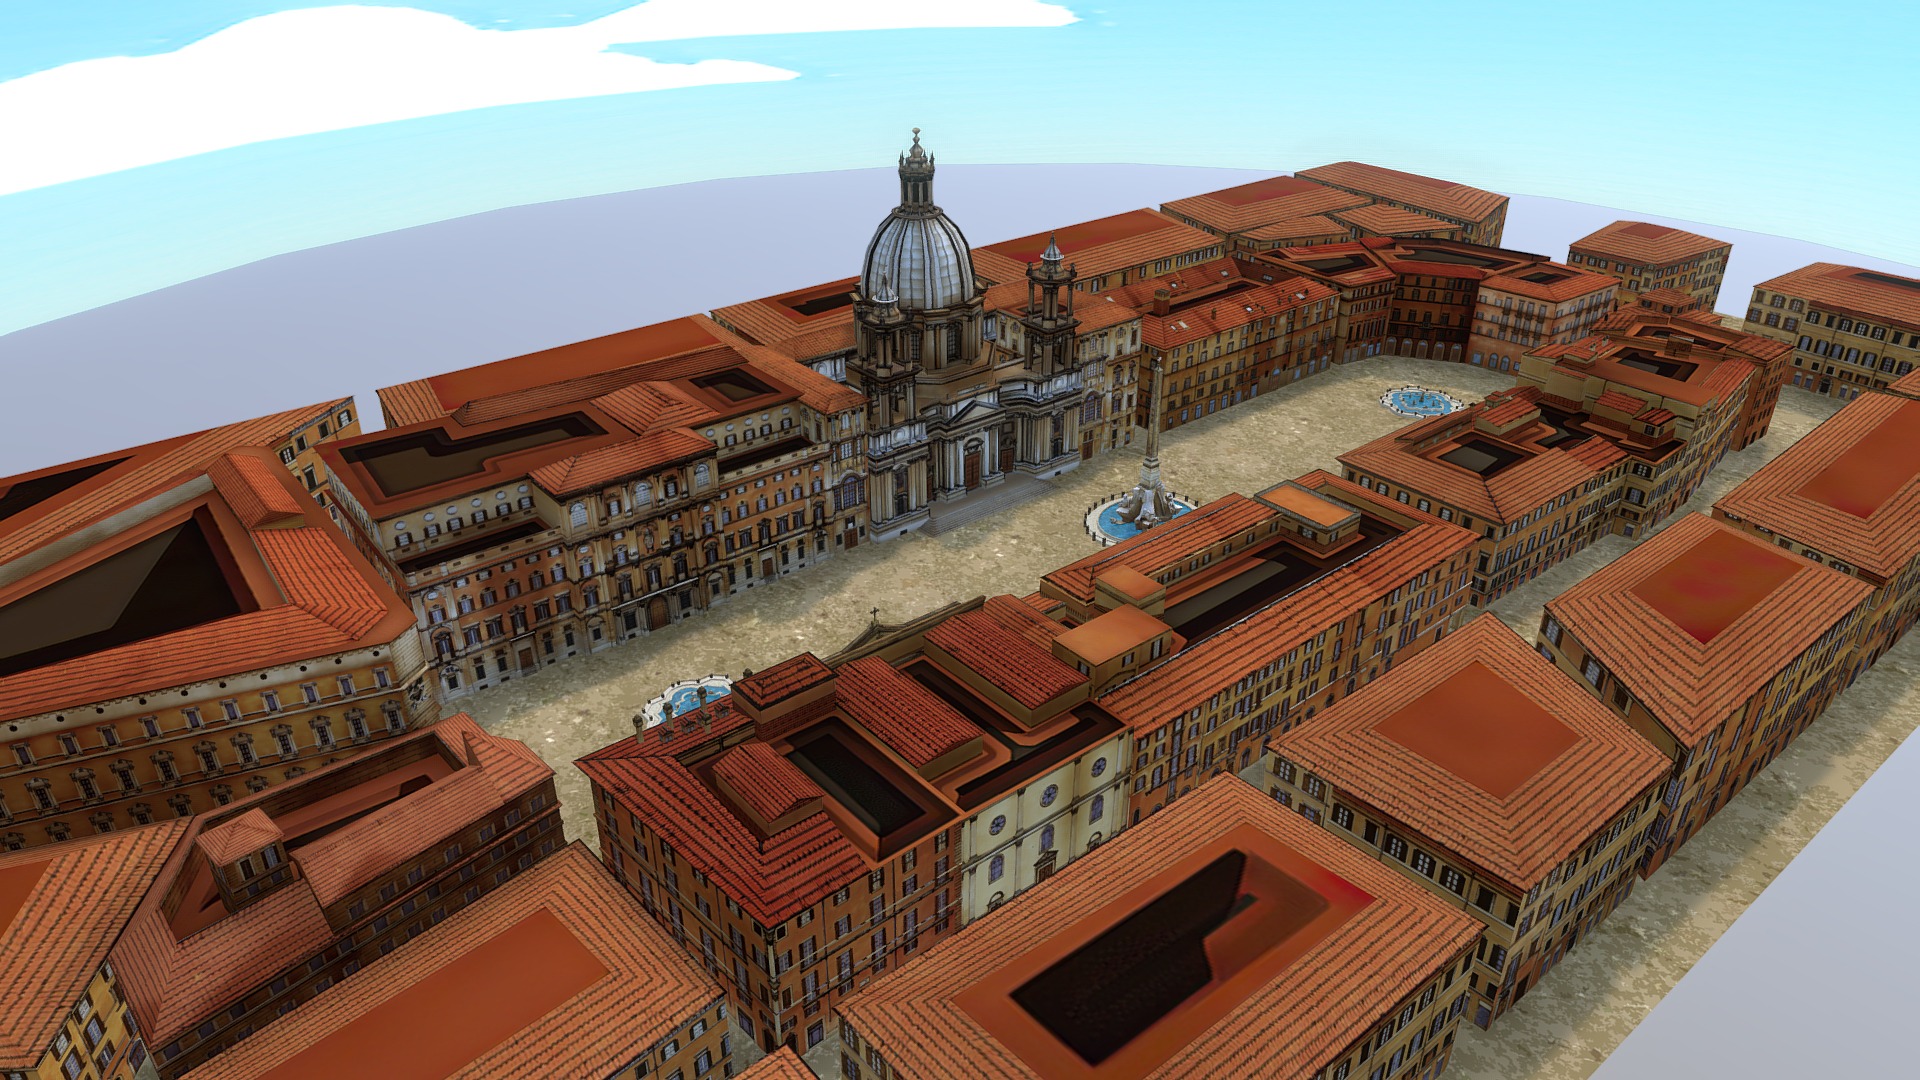 3D model Piazza Navona lowpoly Toon - This is a 3D model of the Piazza Navona lowpoly Toon. The 3D model is about a large building with a domed roof.